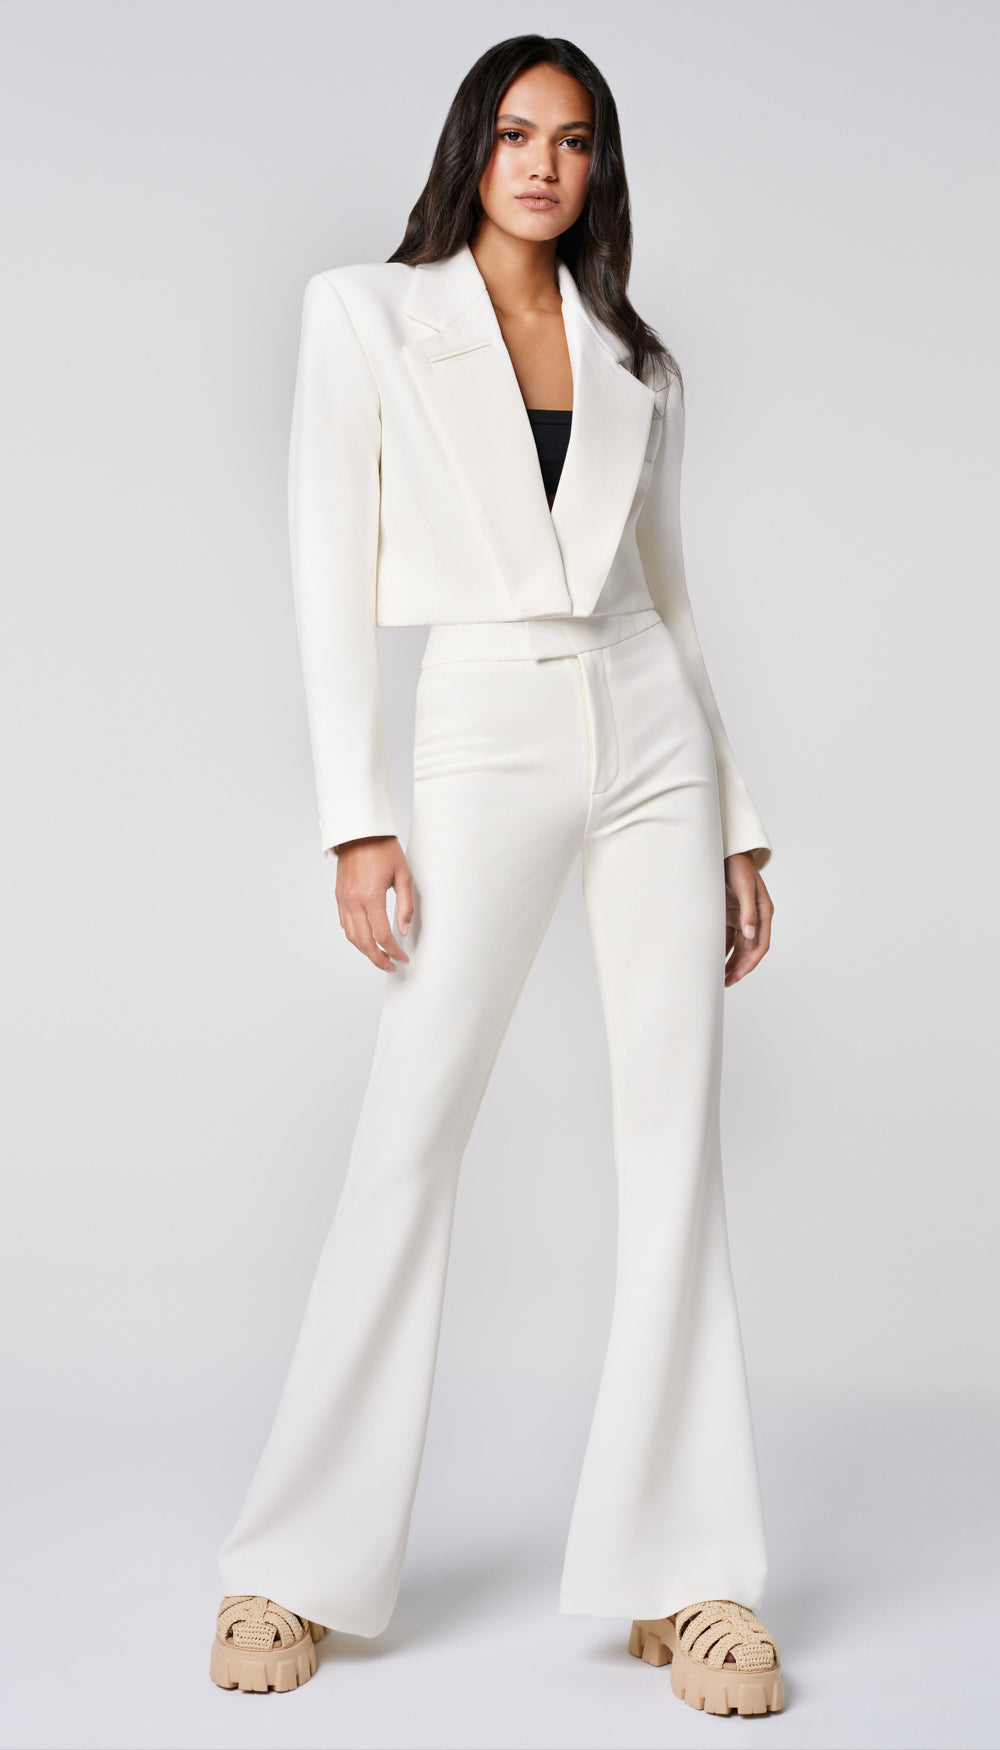 A woman in a white blazer and pant.